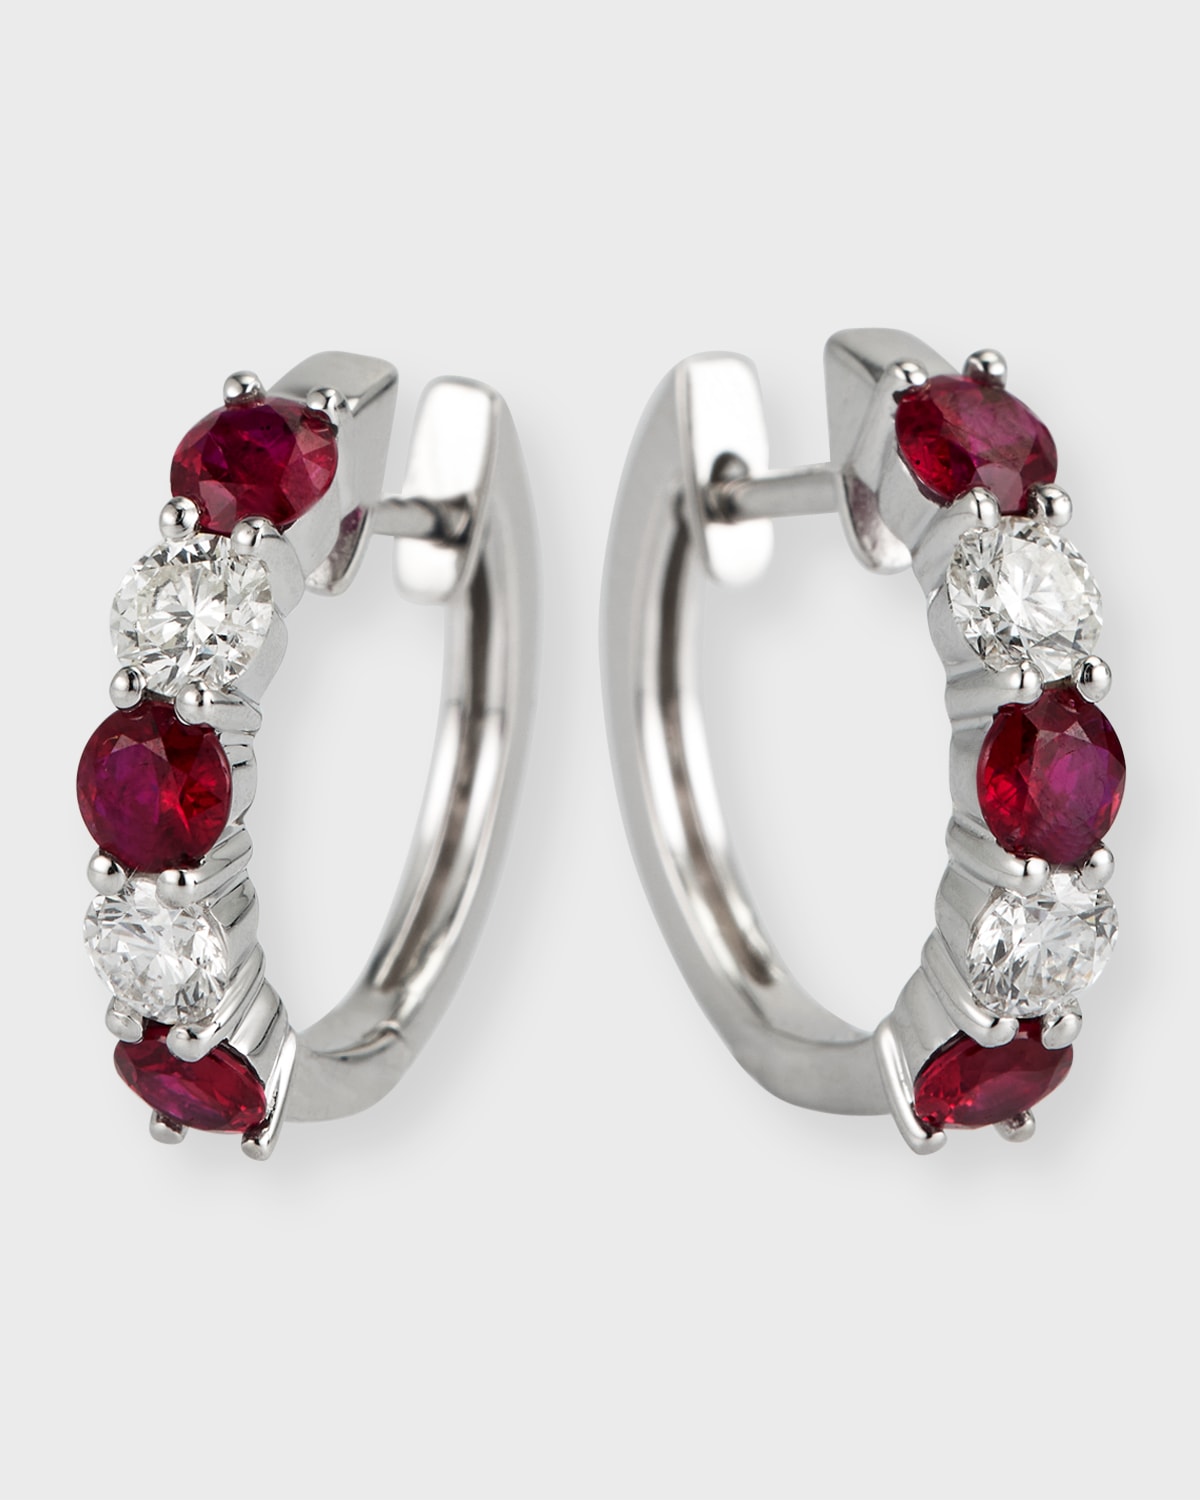 David Kord 18k White Gold Earrings With 3.3mm Alternating Diamonds And Rubies